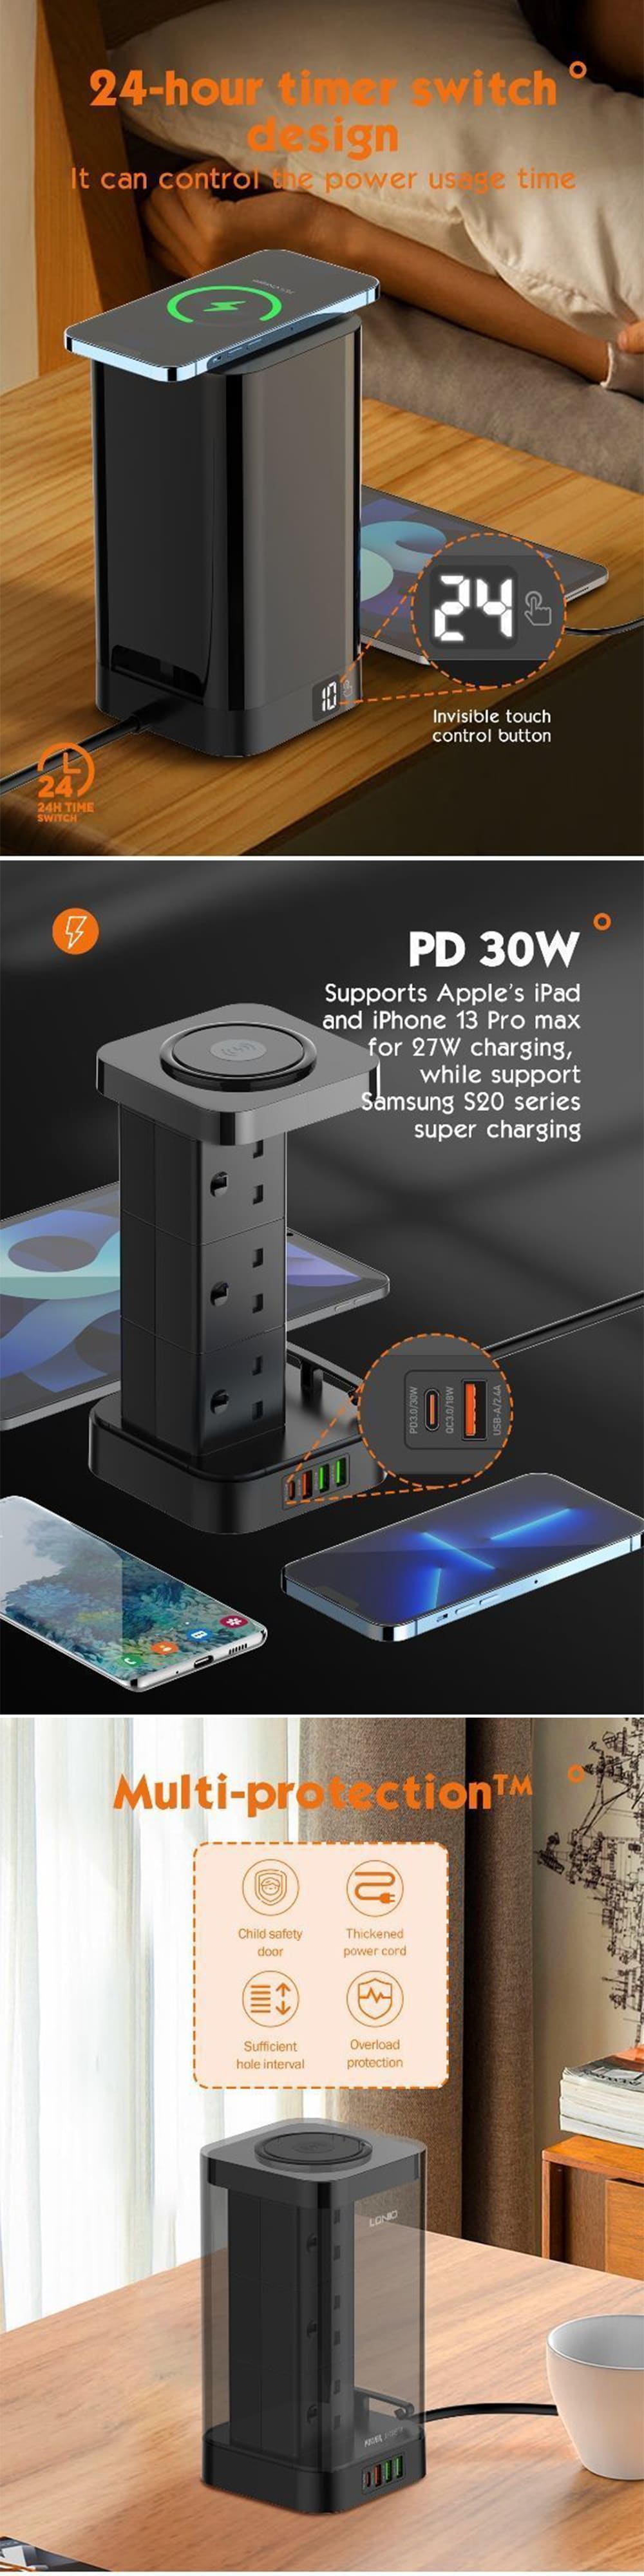 LDNIO SKW6457 6 Outlet USB Tower Extension Power Socket with 15W Wireless Charger 7